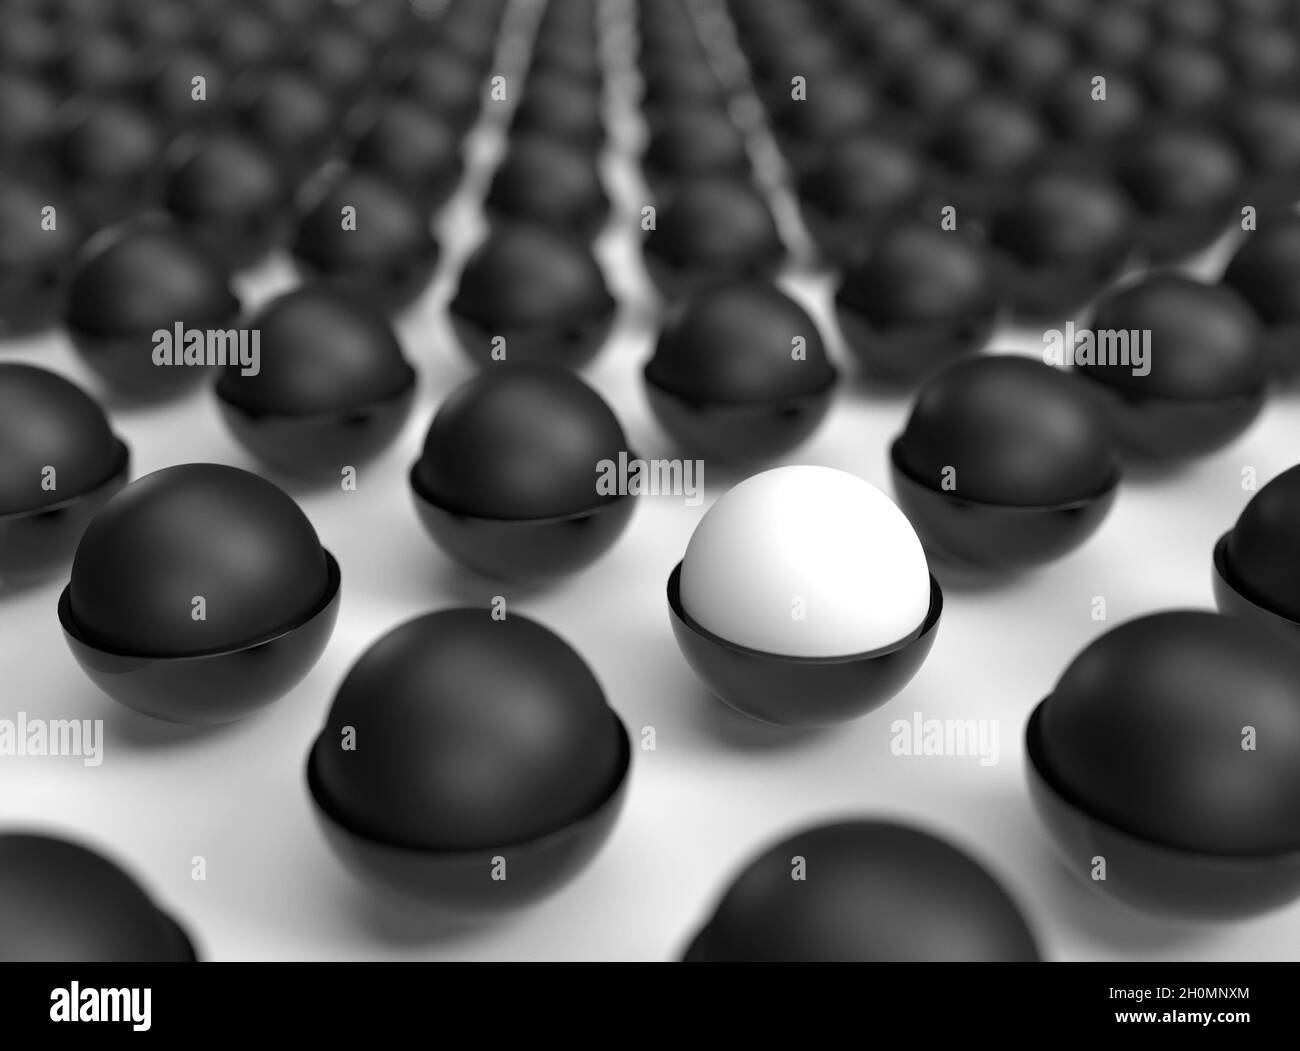 A single white ball in a field of black balls Stock Photo